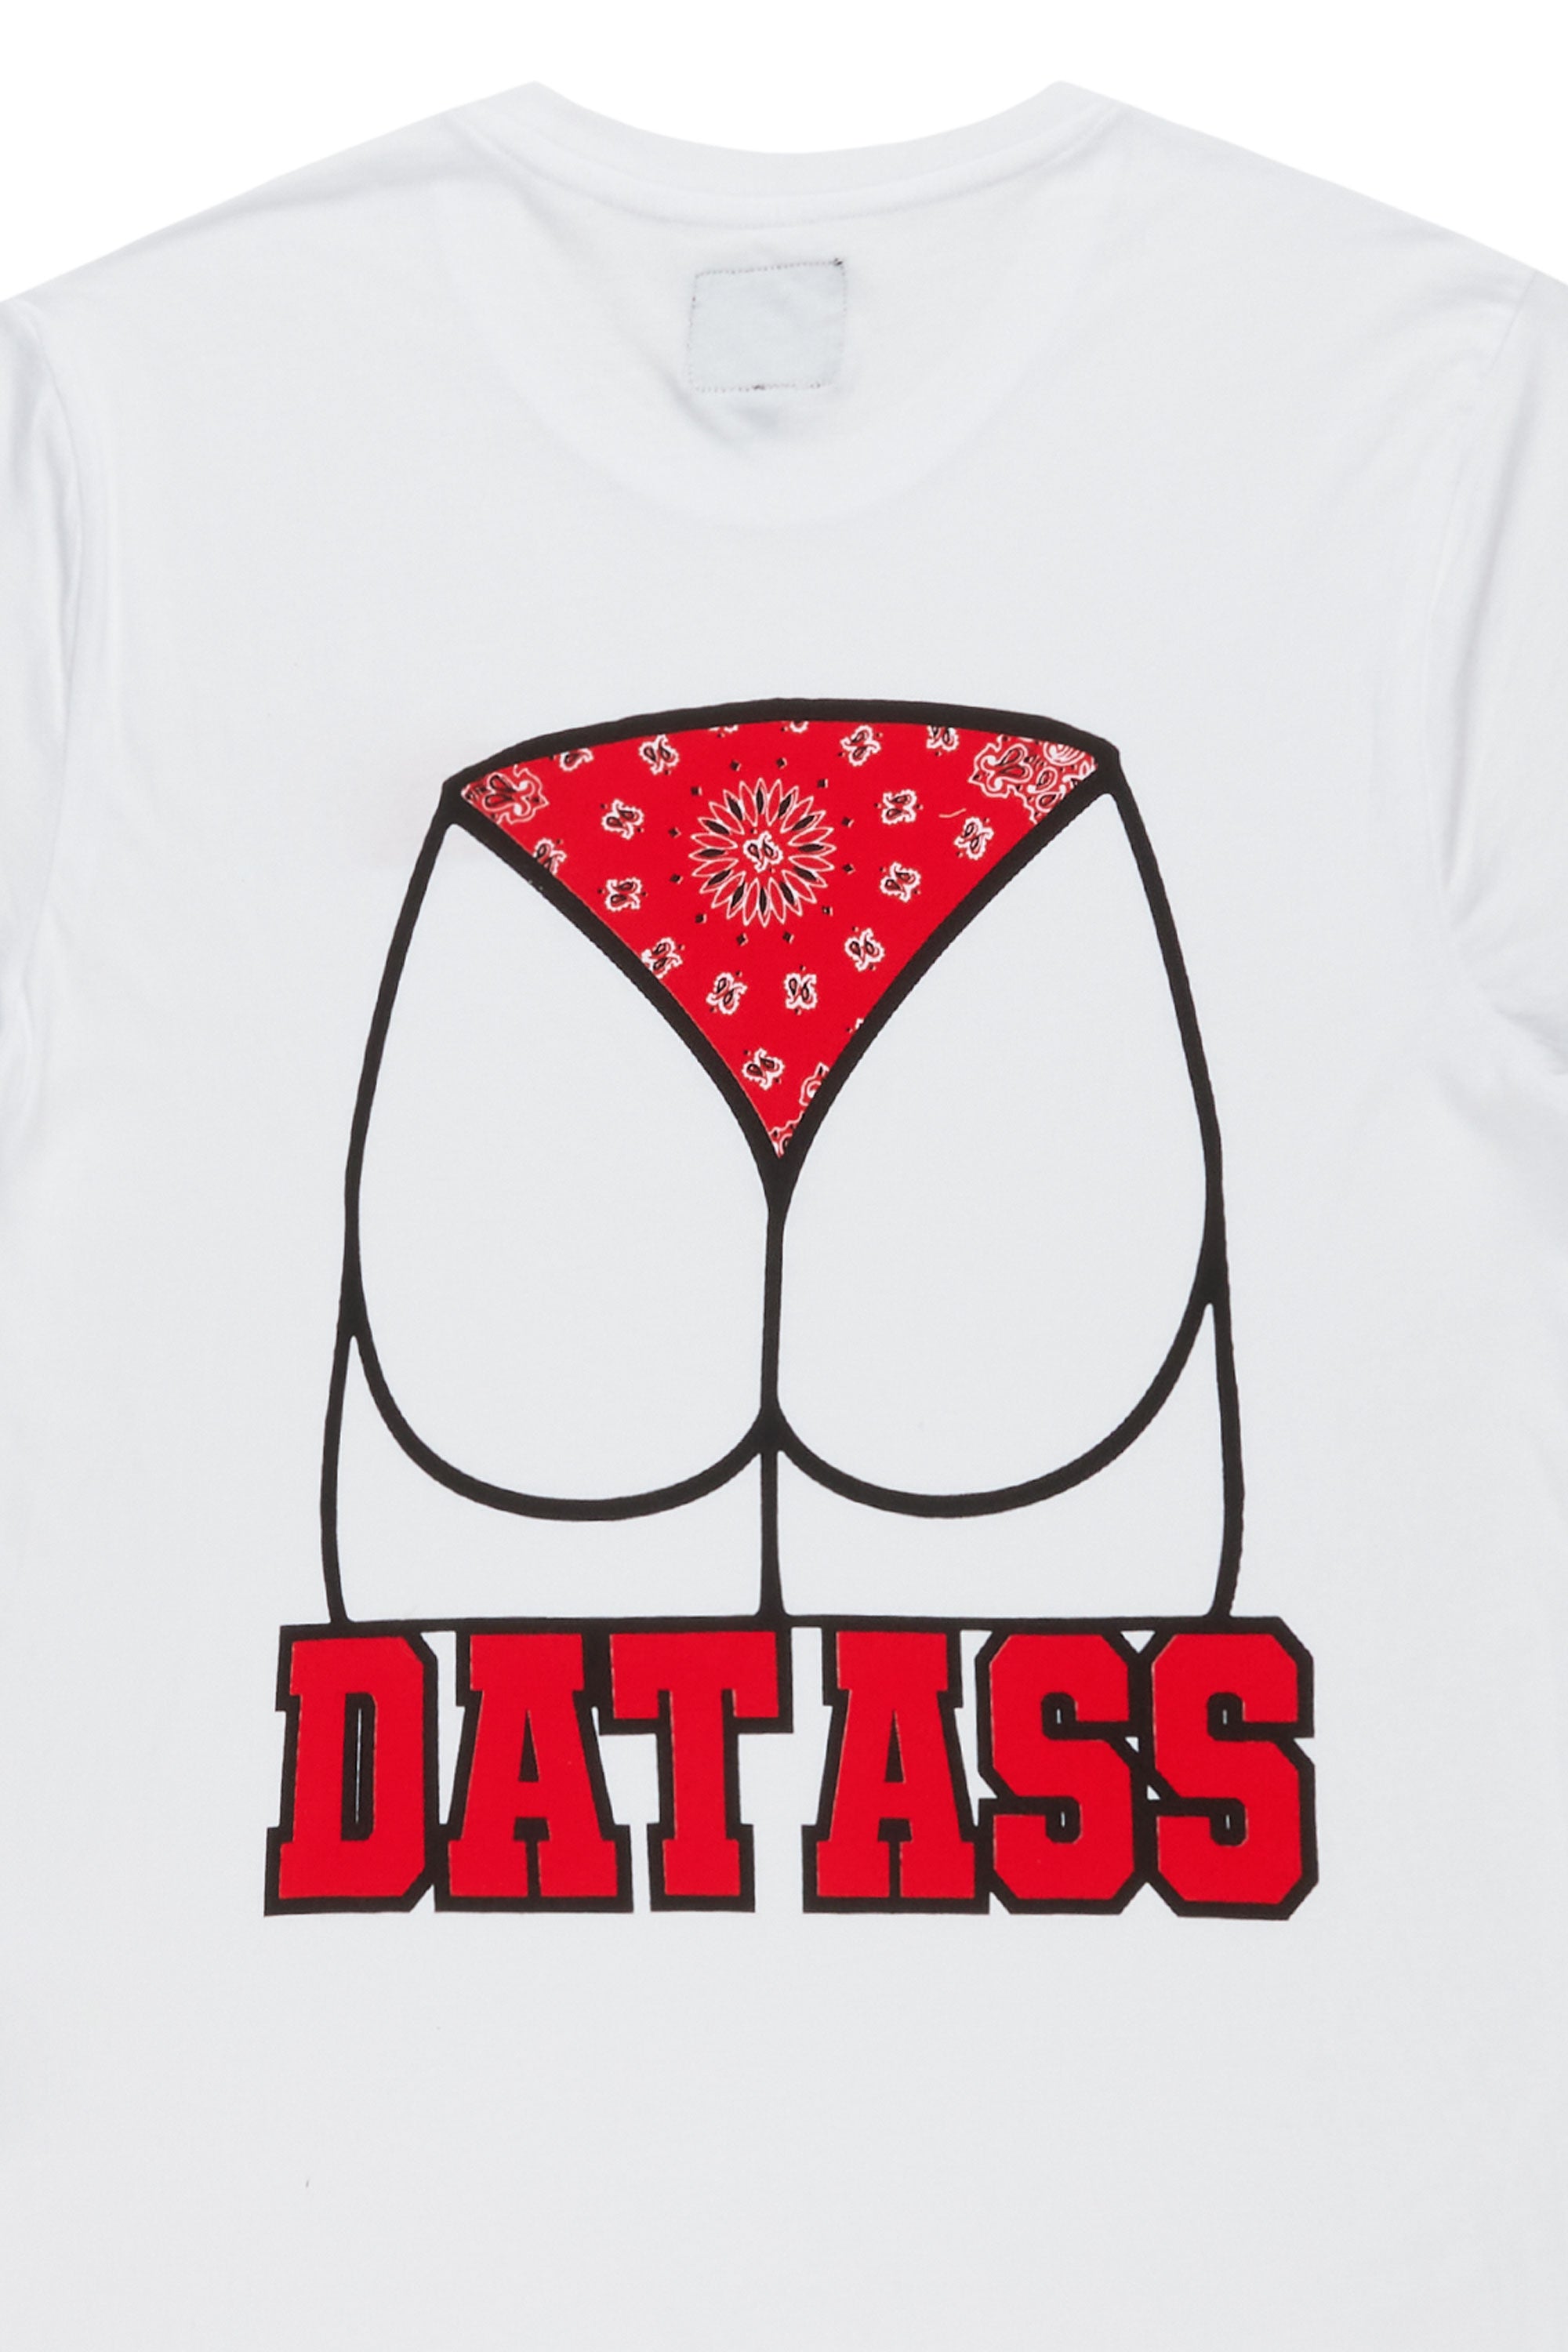 Jayliss White/Red Graphic T-Shirt